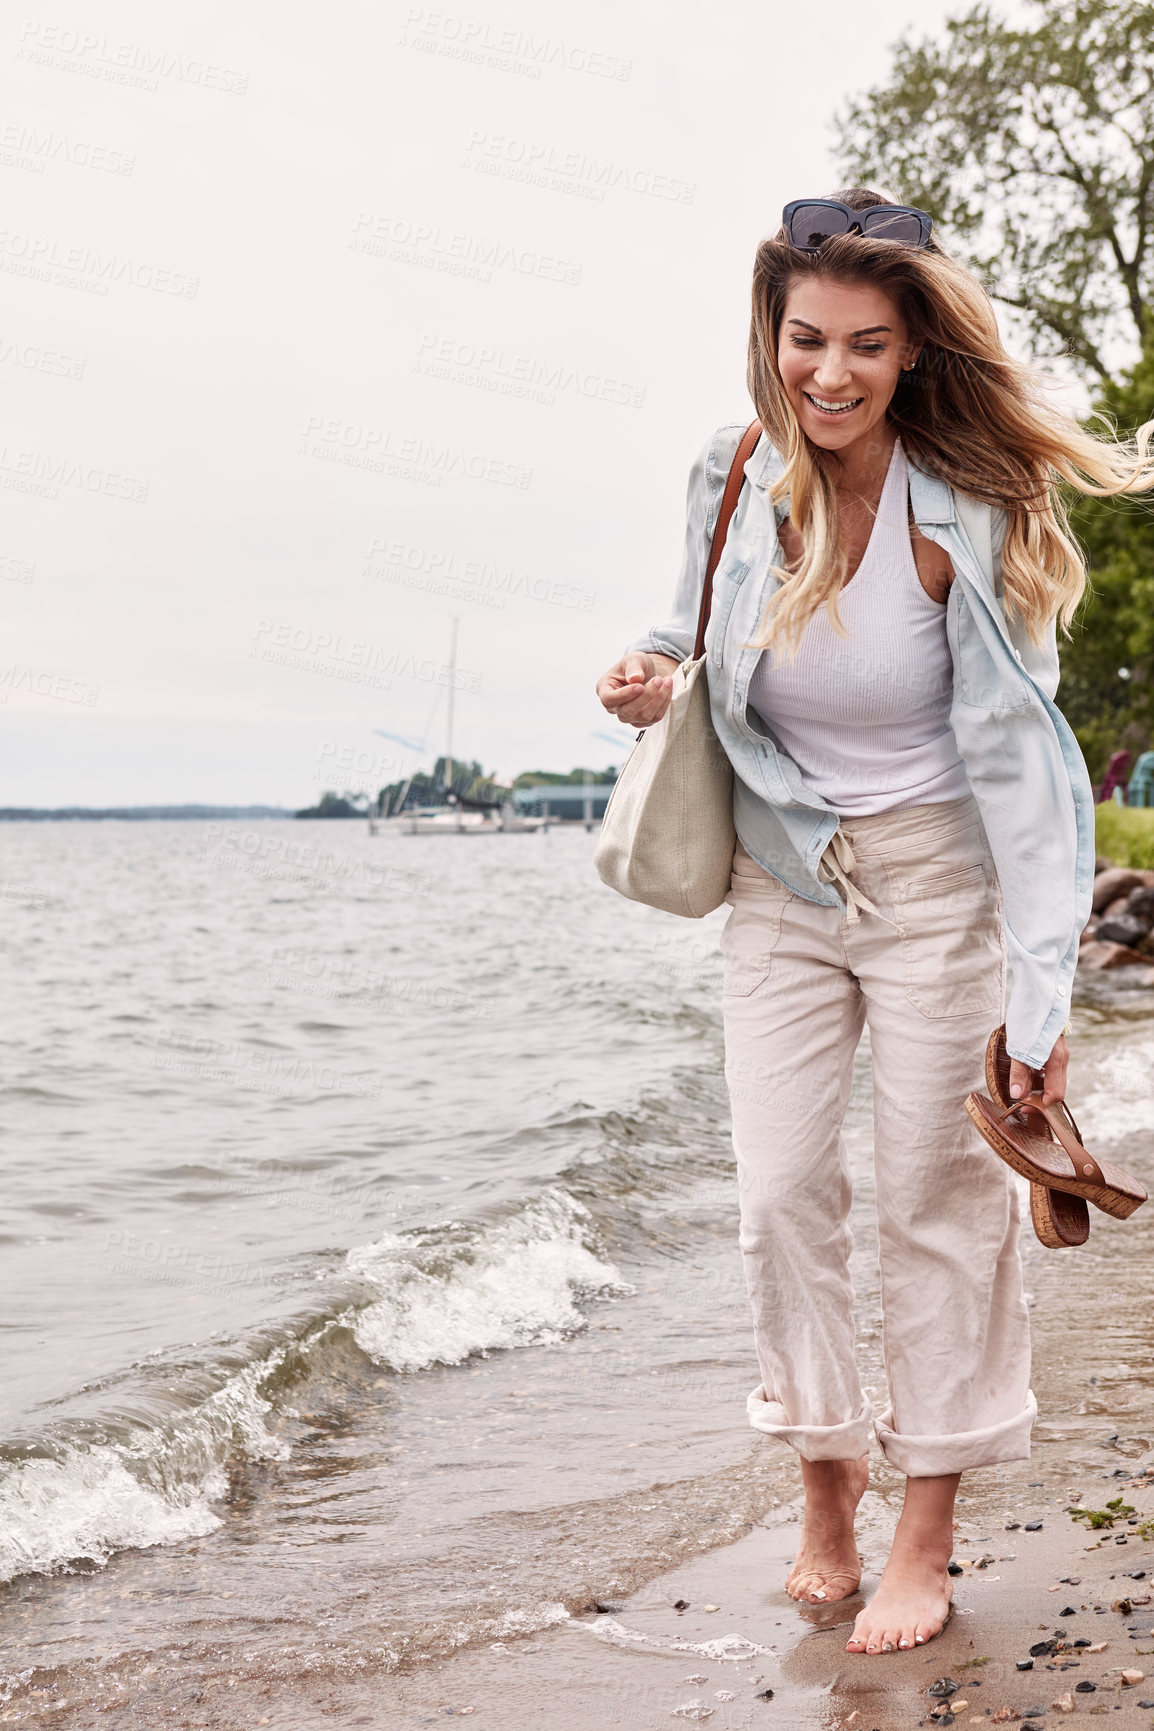 Buy stock photo Shot of a beautiful young woman going for a walk along the waters edge of a lake